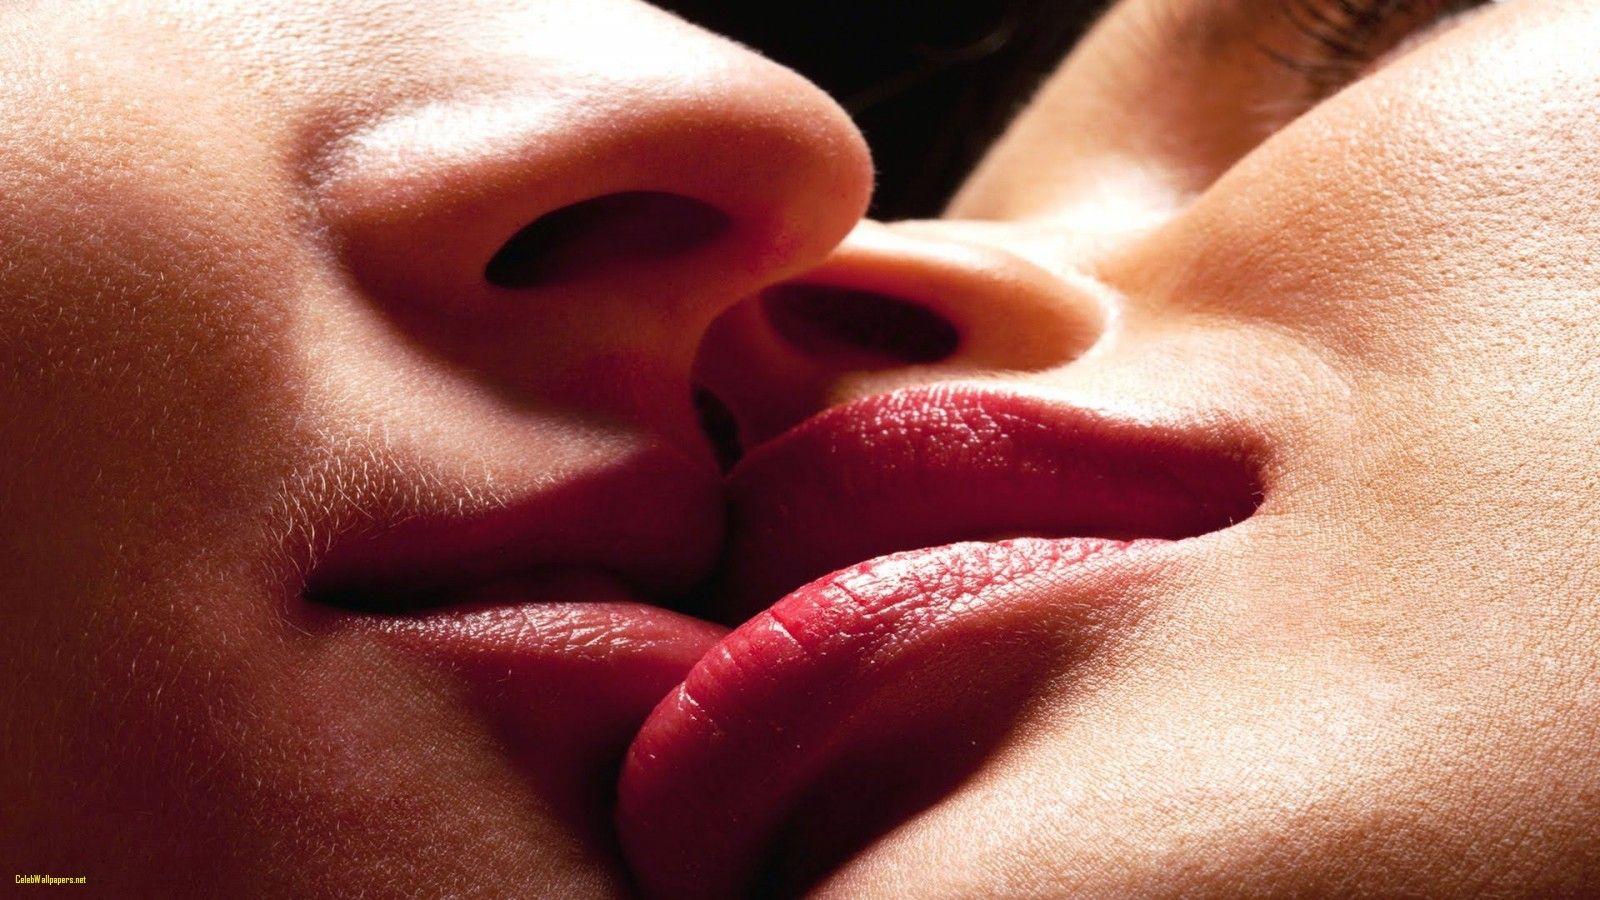 Hot Kiss Wallpaper Download Free Candy Colors Lips Mobile Best Of